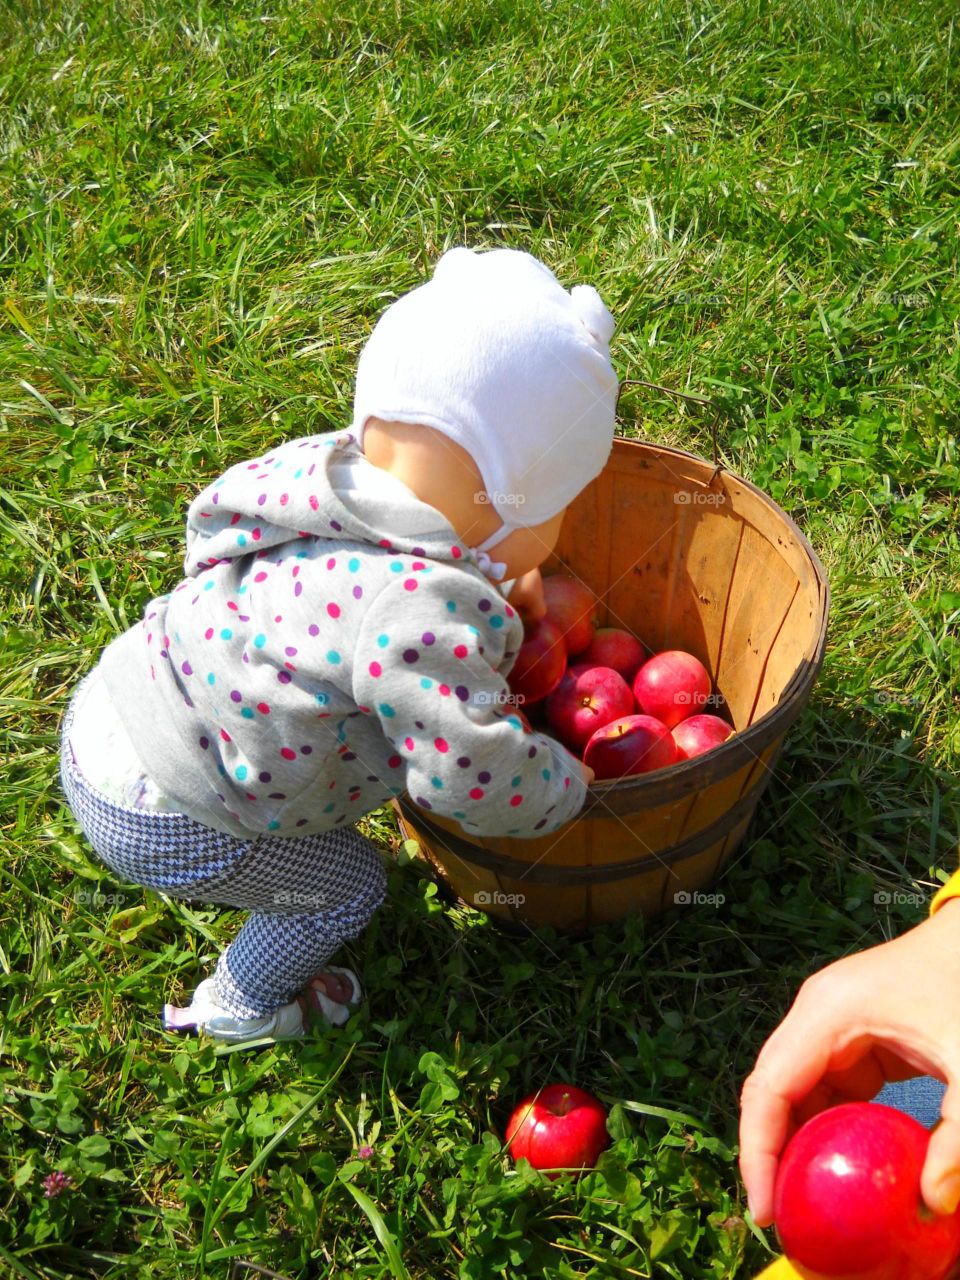 Sorting The Apples